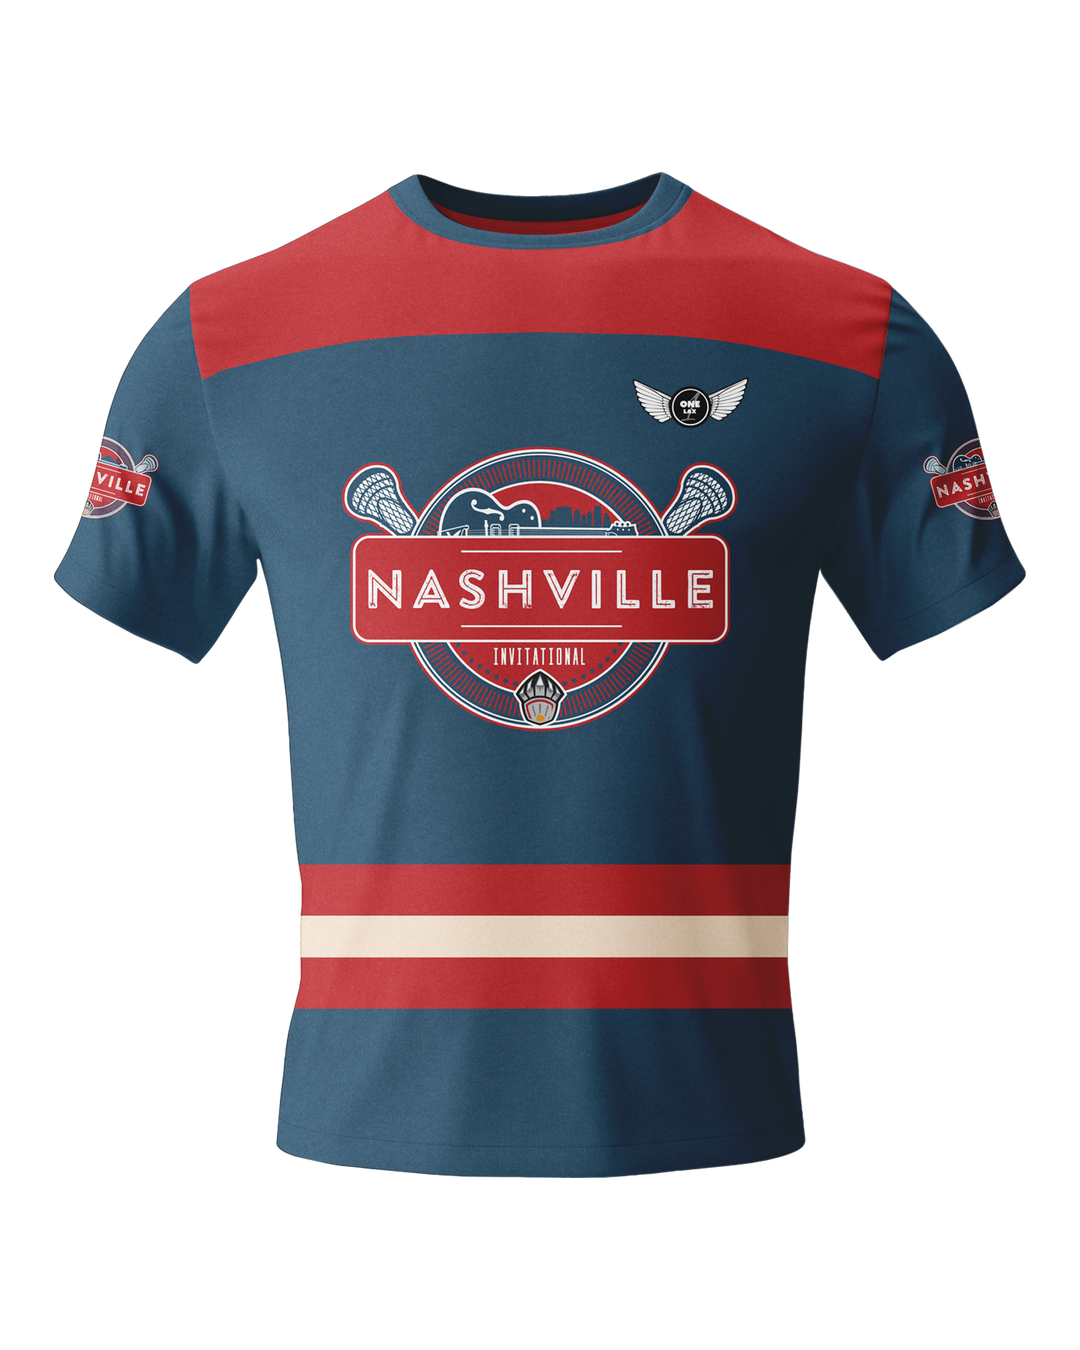 One Lax Nashville Dry Fit Tee - One Lax